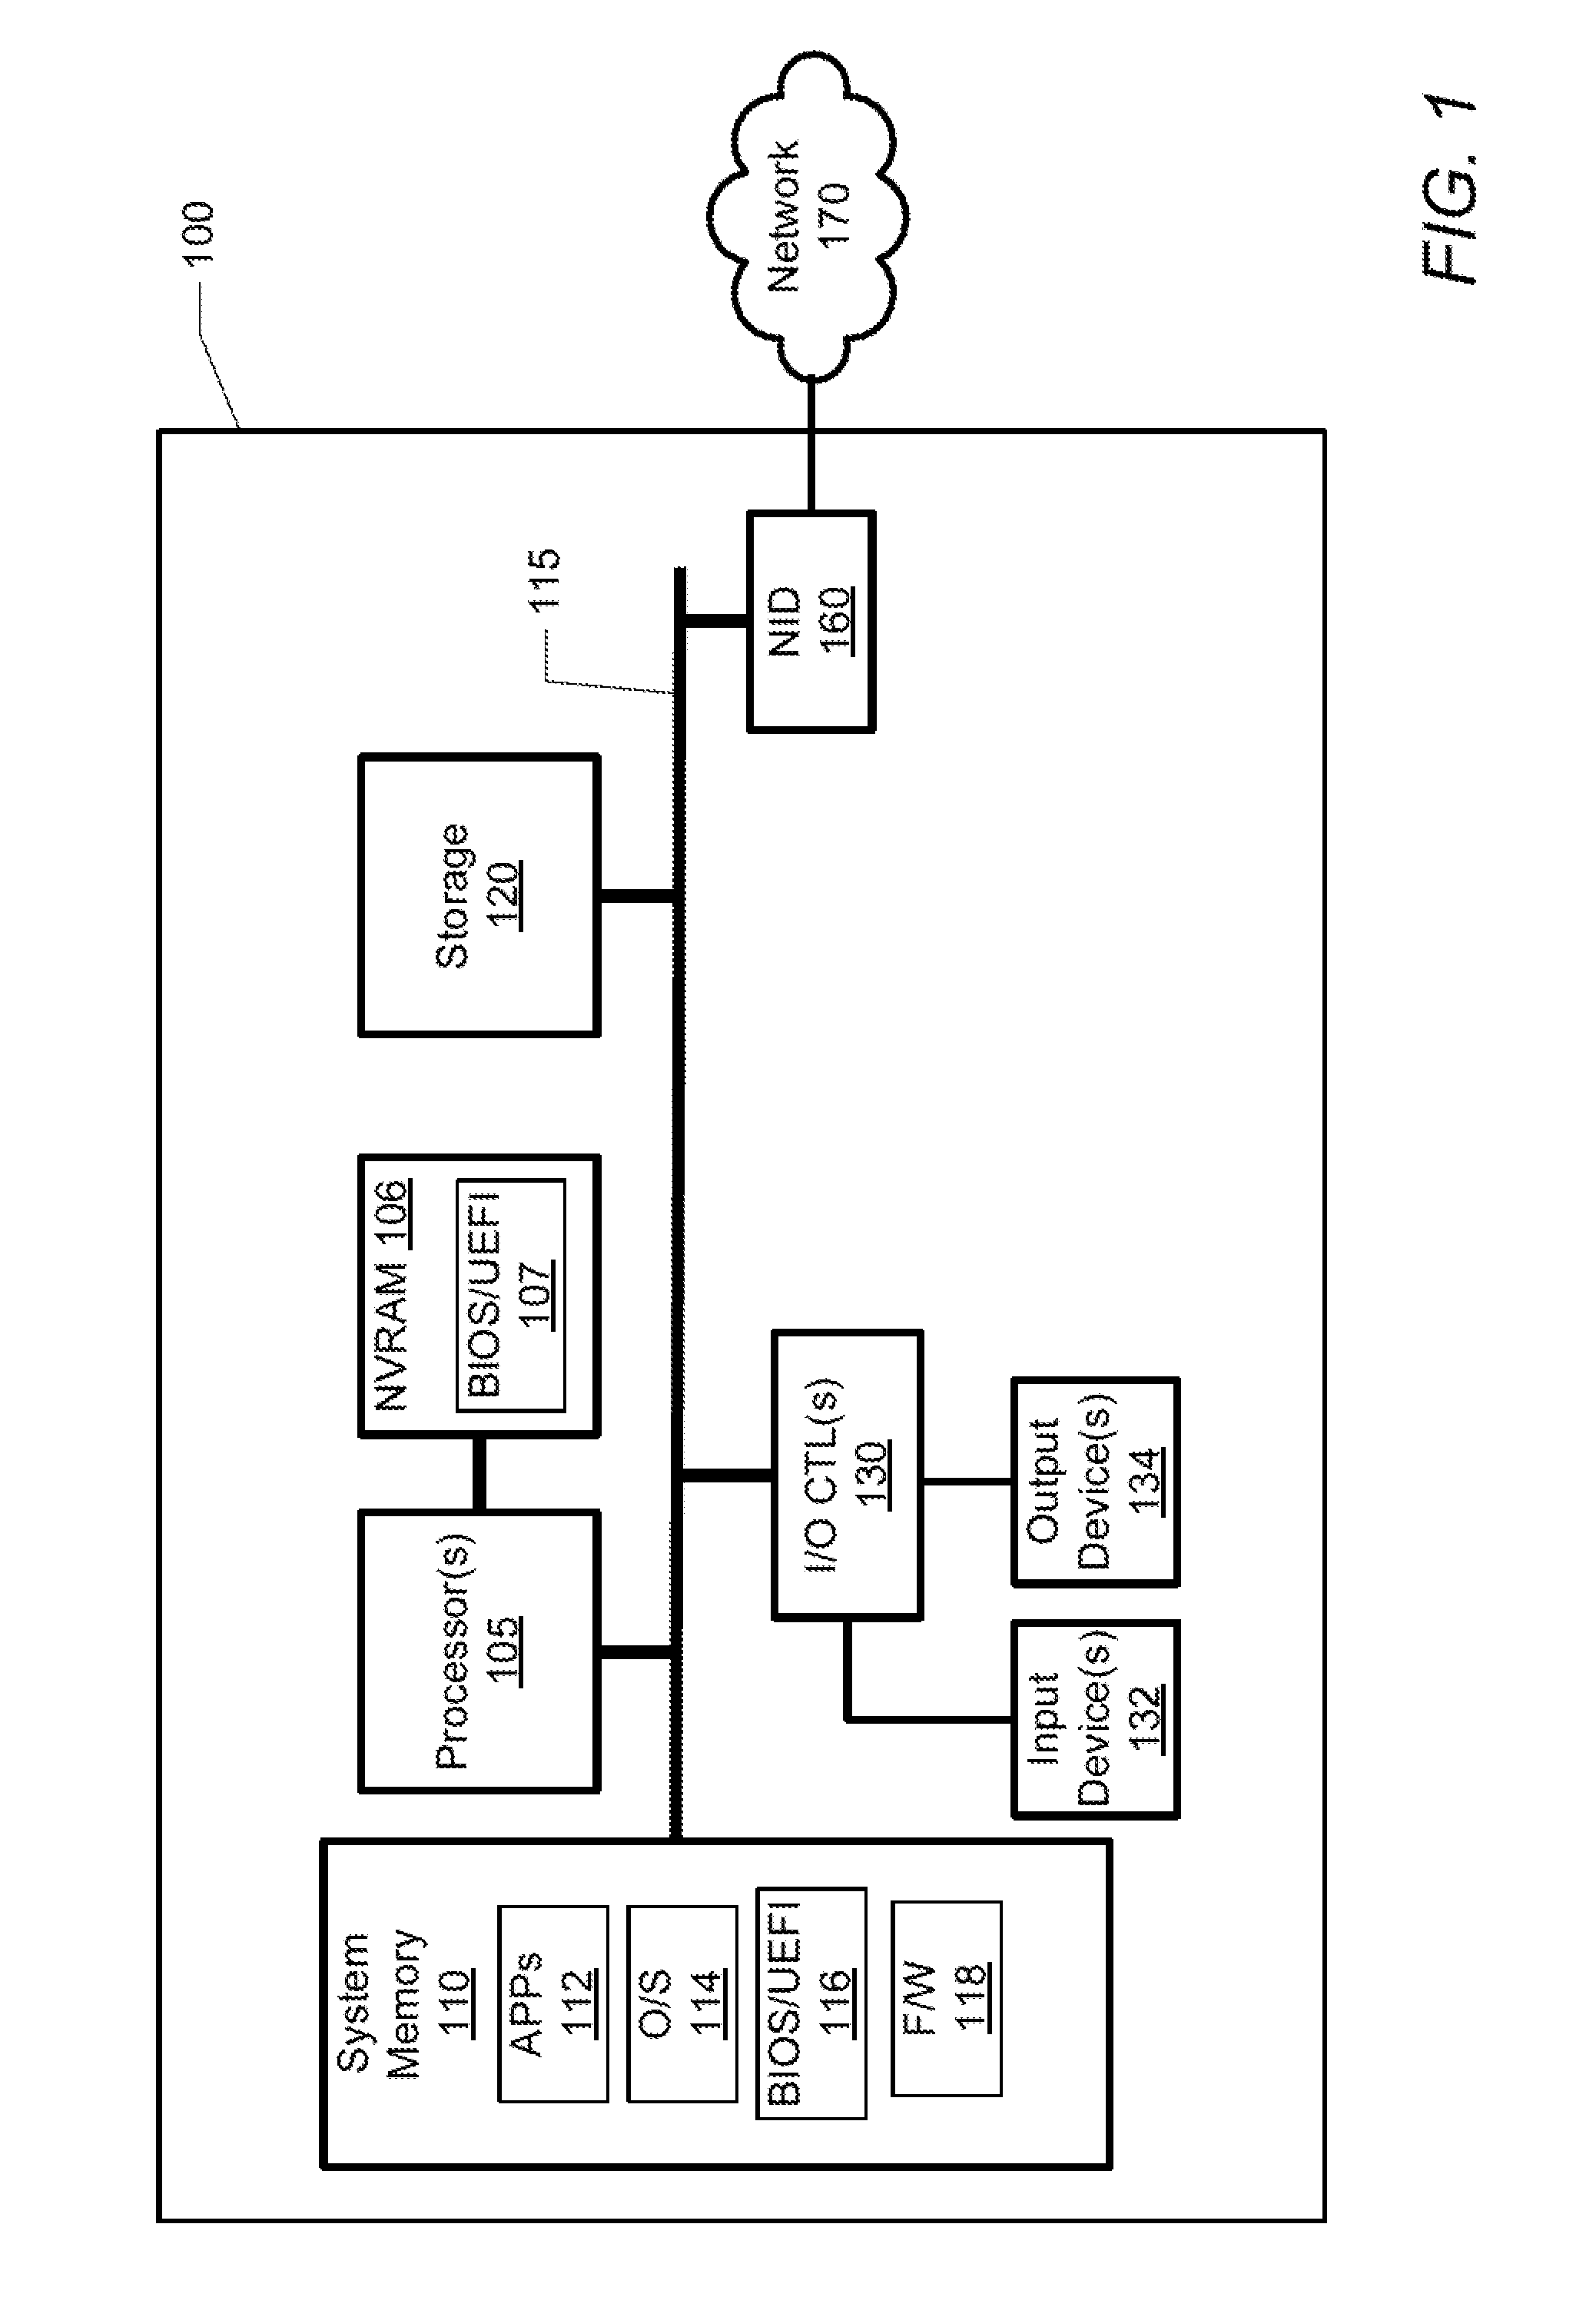 Method for optimizing boot time of an information handling system